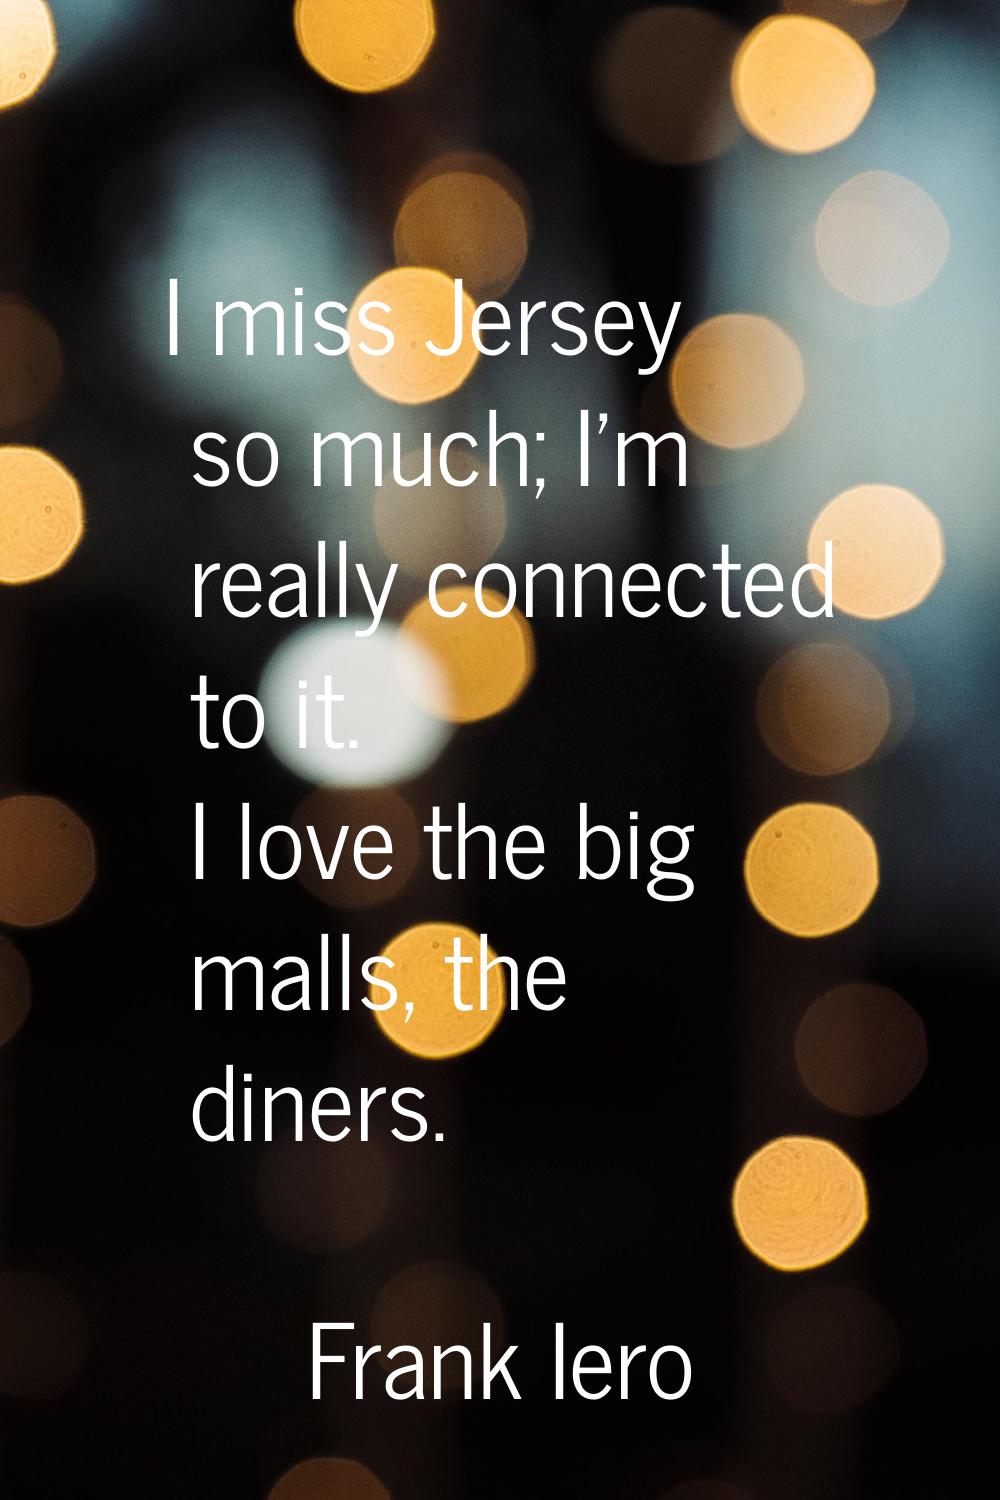 I miss Jersey so much; I'm really connected to it. I love the big malls, the diners.